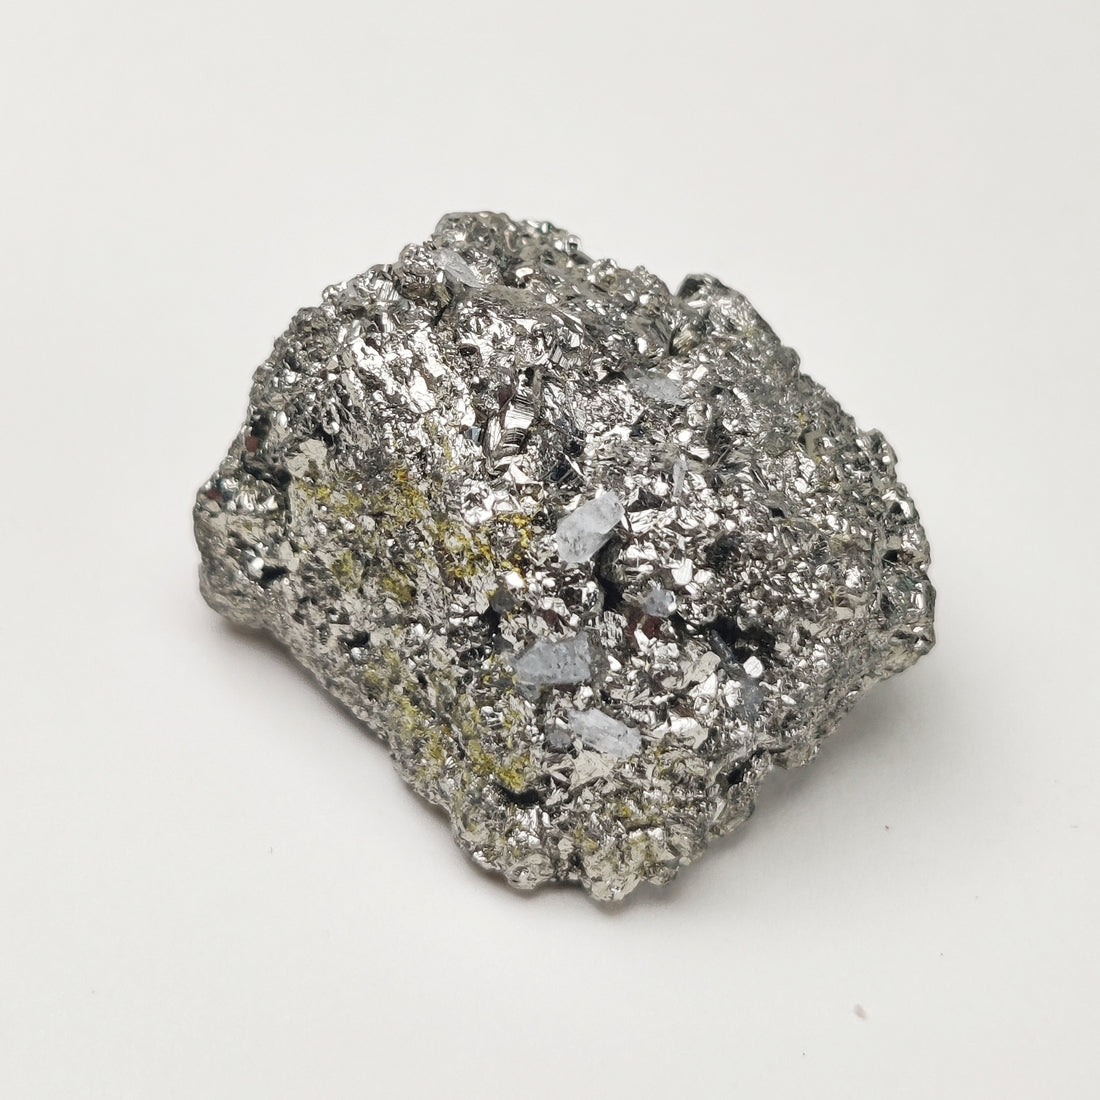 Pyrite Meaning & Properties